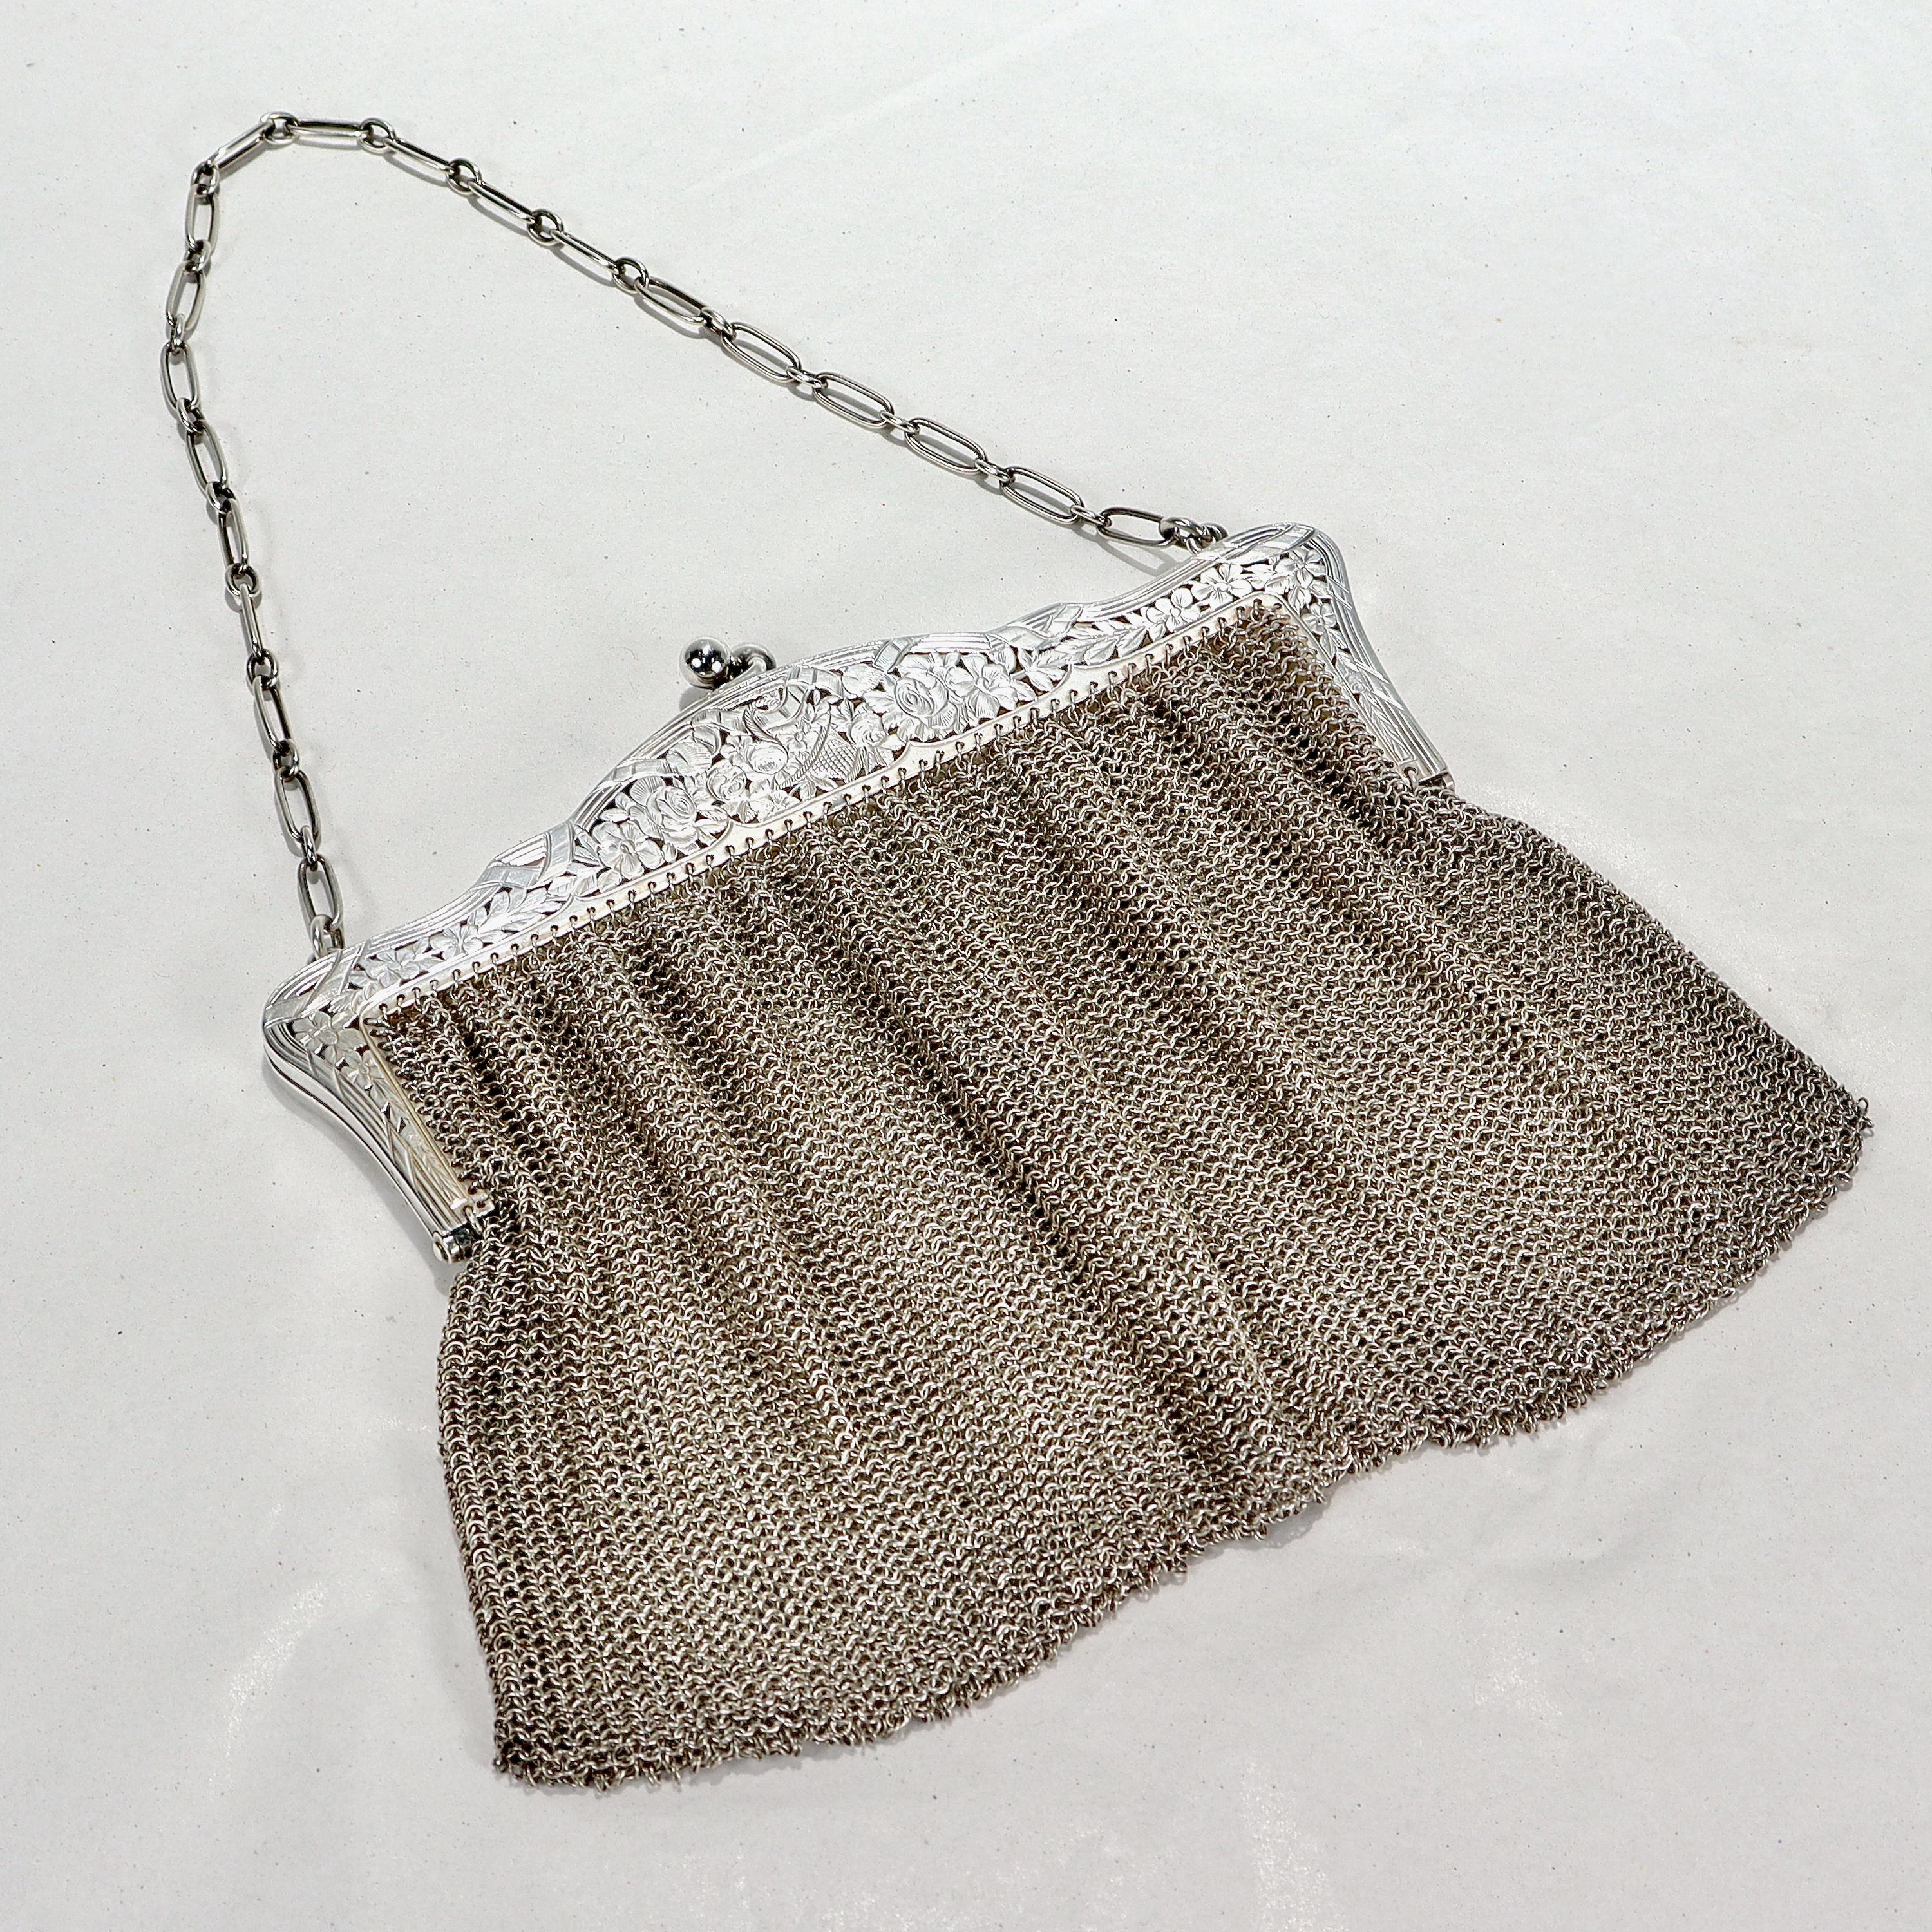 A fine vintage silver mesh purse.

Consisting of a silver mesh divided bag separated by a folding internal arm. 

Supported by an ornate pierced & etched frame & chain link handle.

Simply a wonderful Art Deco sterling silver purse! 

Date:
Early to